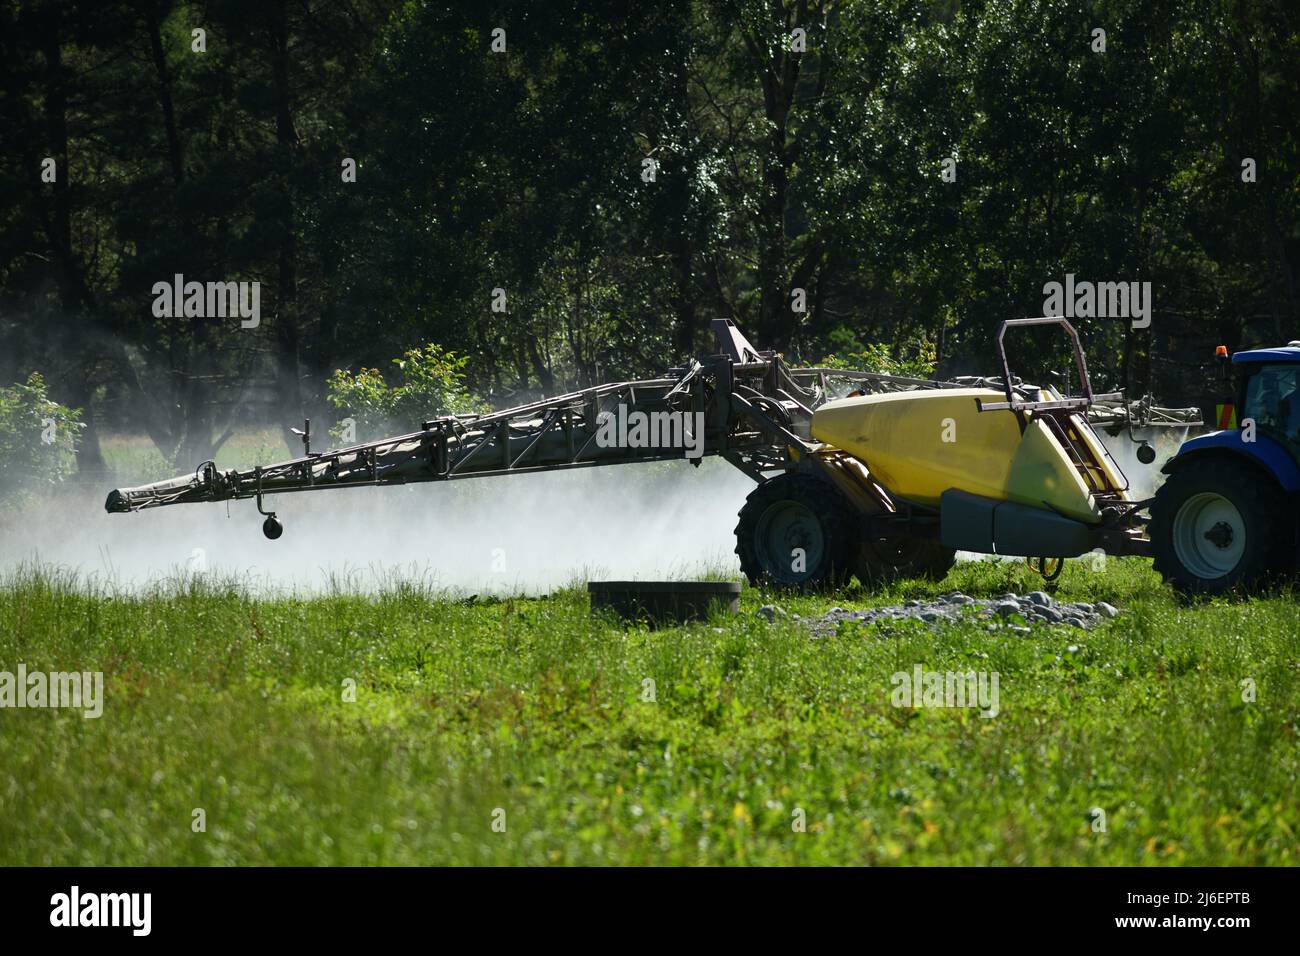 A farmer uses a large sprayer to spread herbicide on a paddock Stock Photo